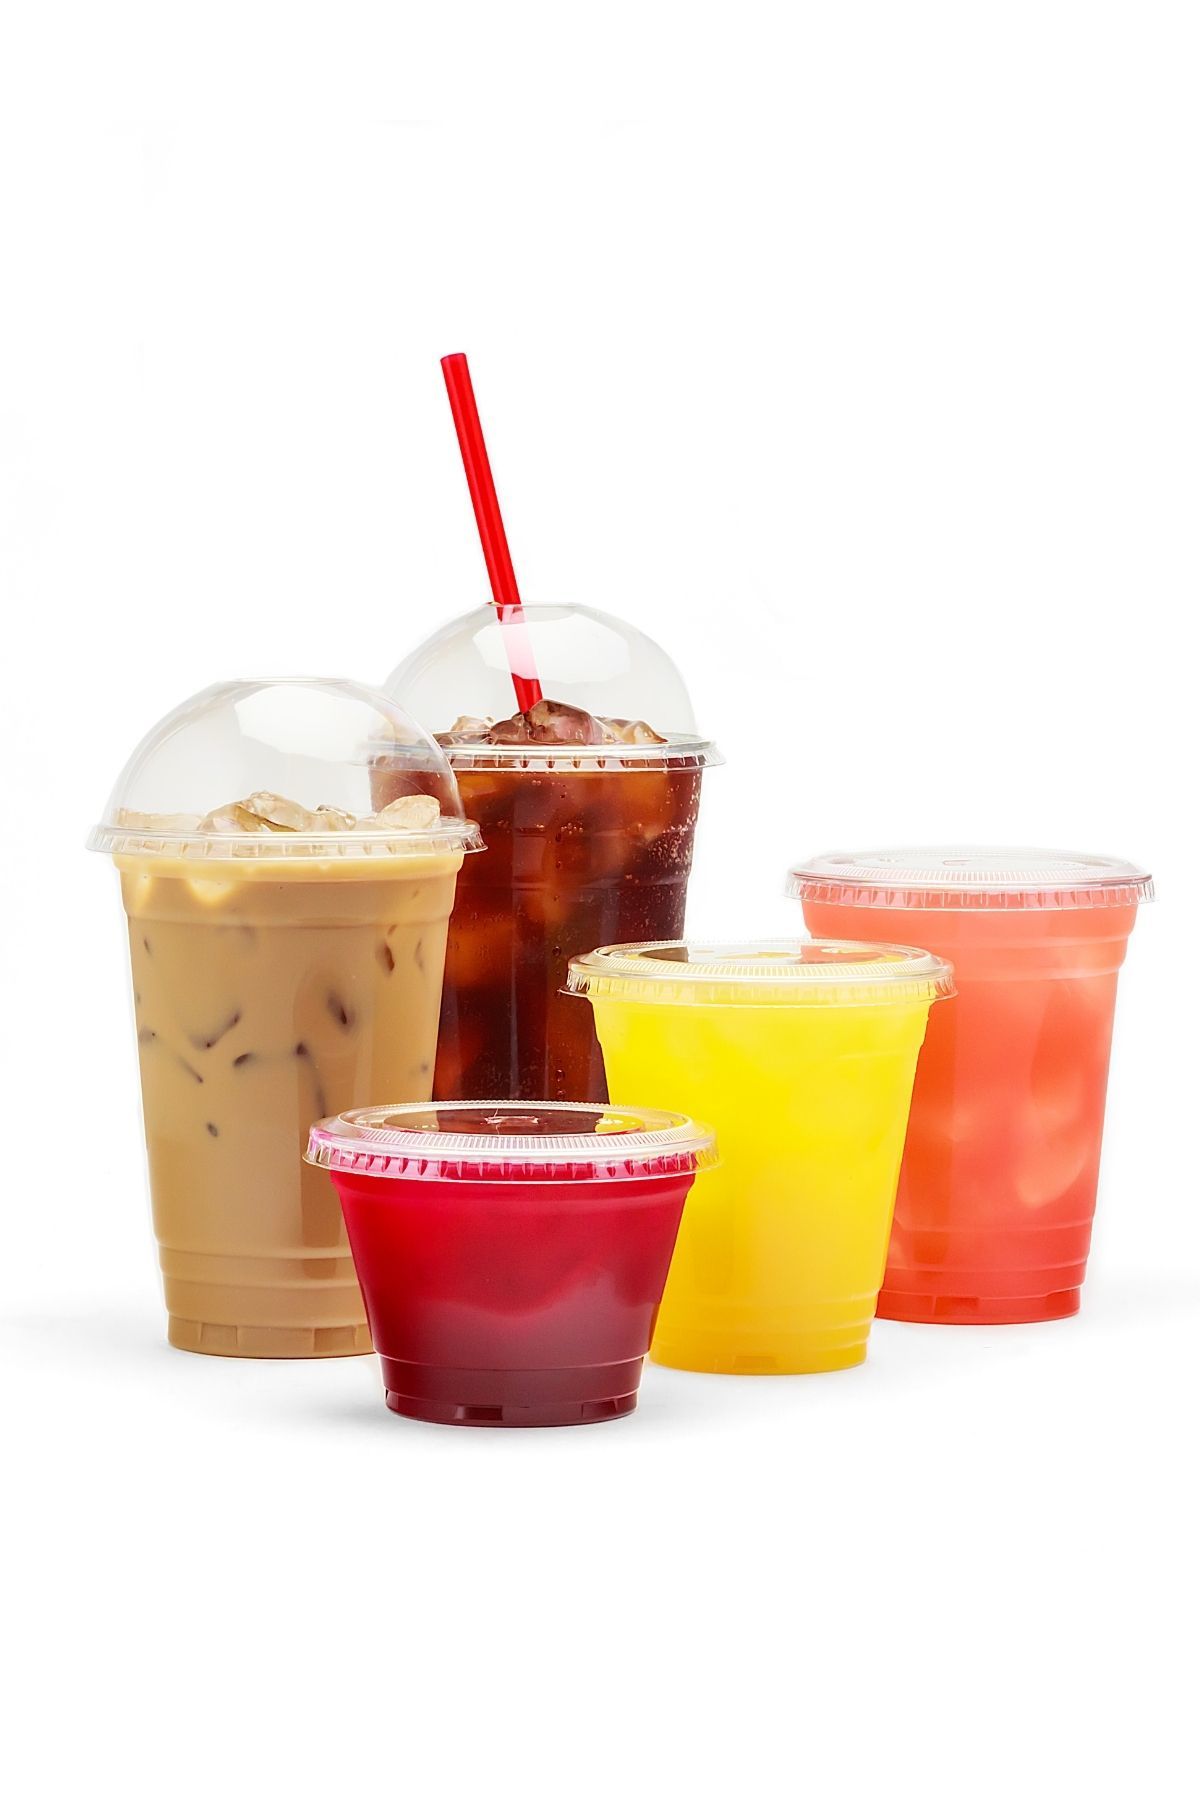 clear cups and dishes of various sizes with lids filled with various liquids